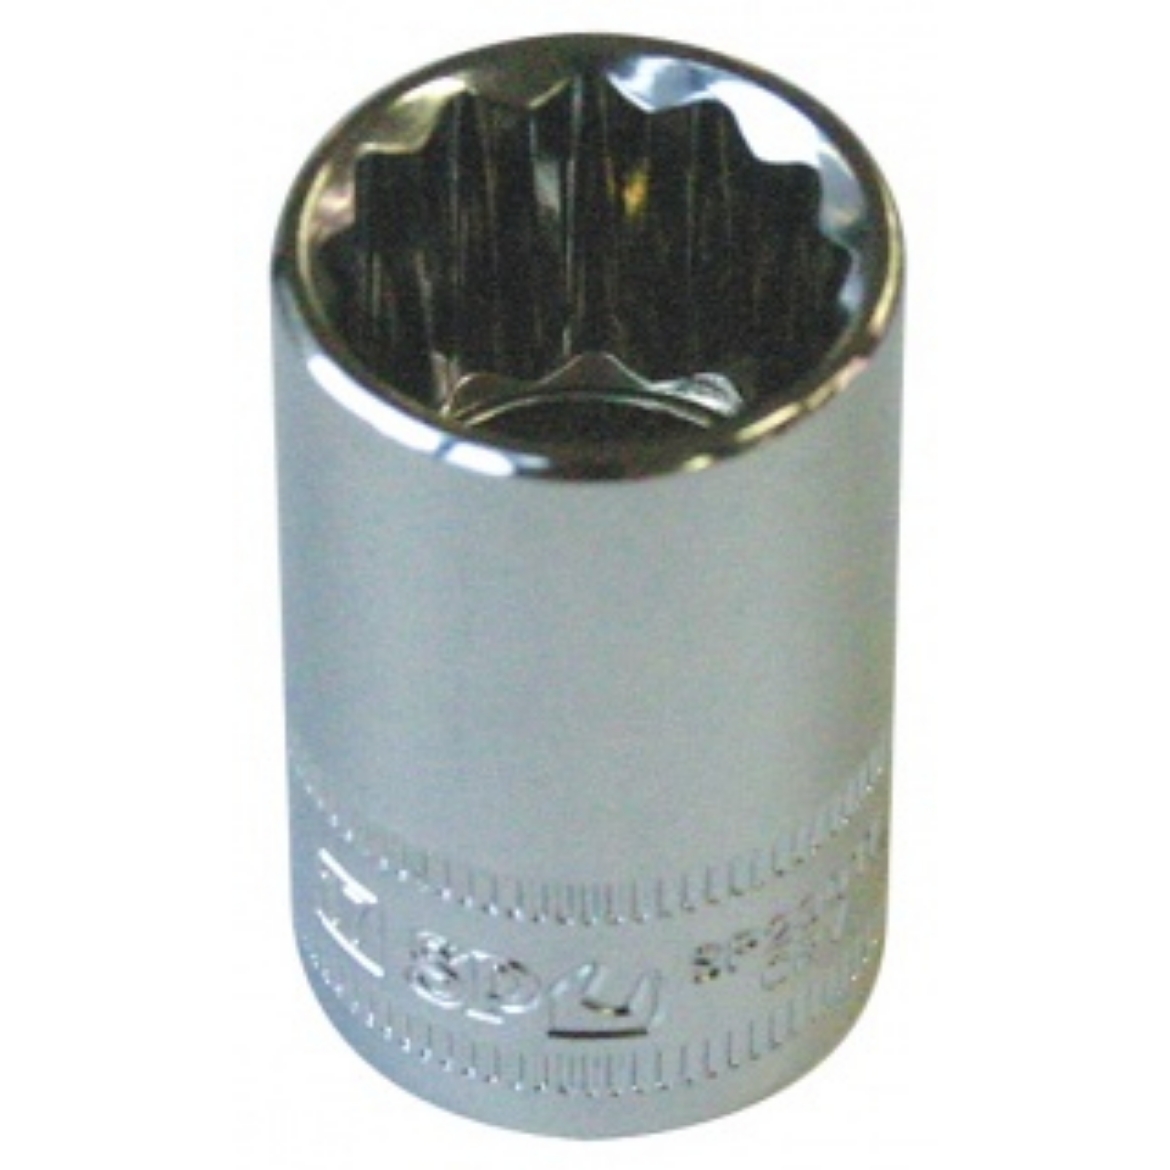 Picture of SOCKET 1/2"DR 12PT METRIC 21MM SP TOOLS